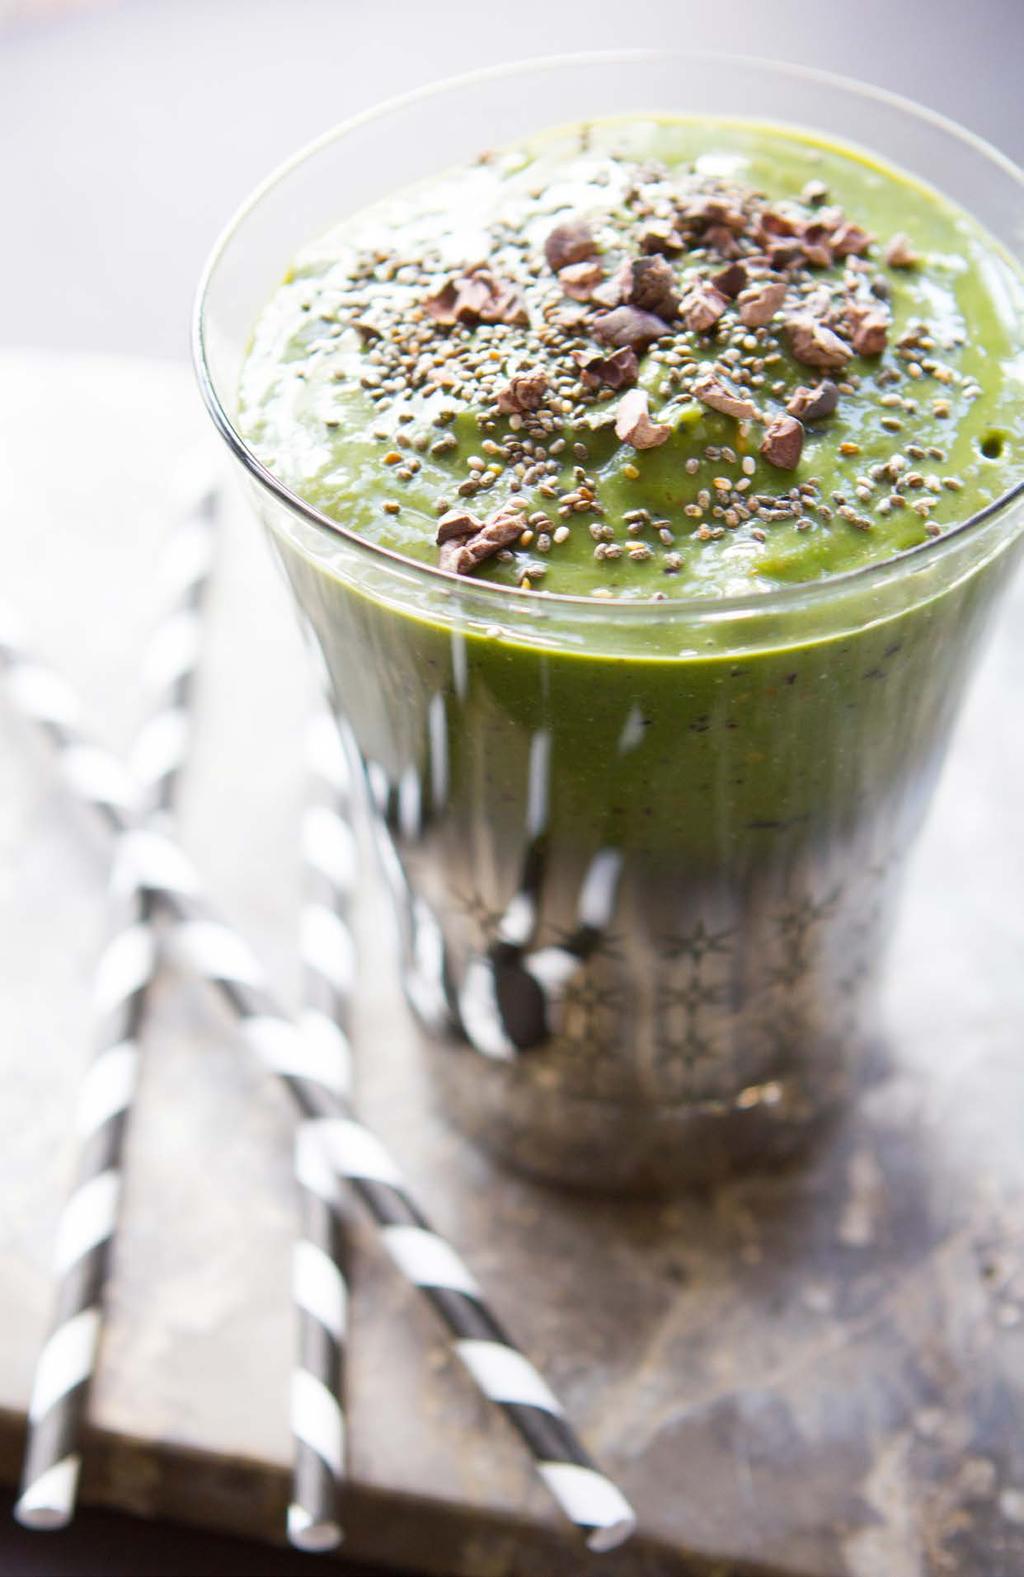 13. MICROGREEN MUNCHER 2 cups kale 1 cup spinach 1 large handful microgreens 1 apple ½ frozen